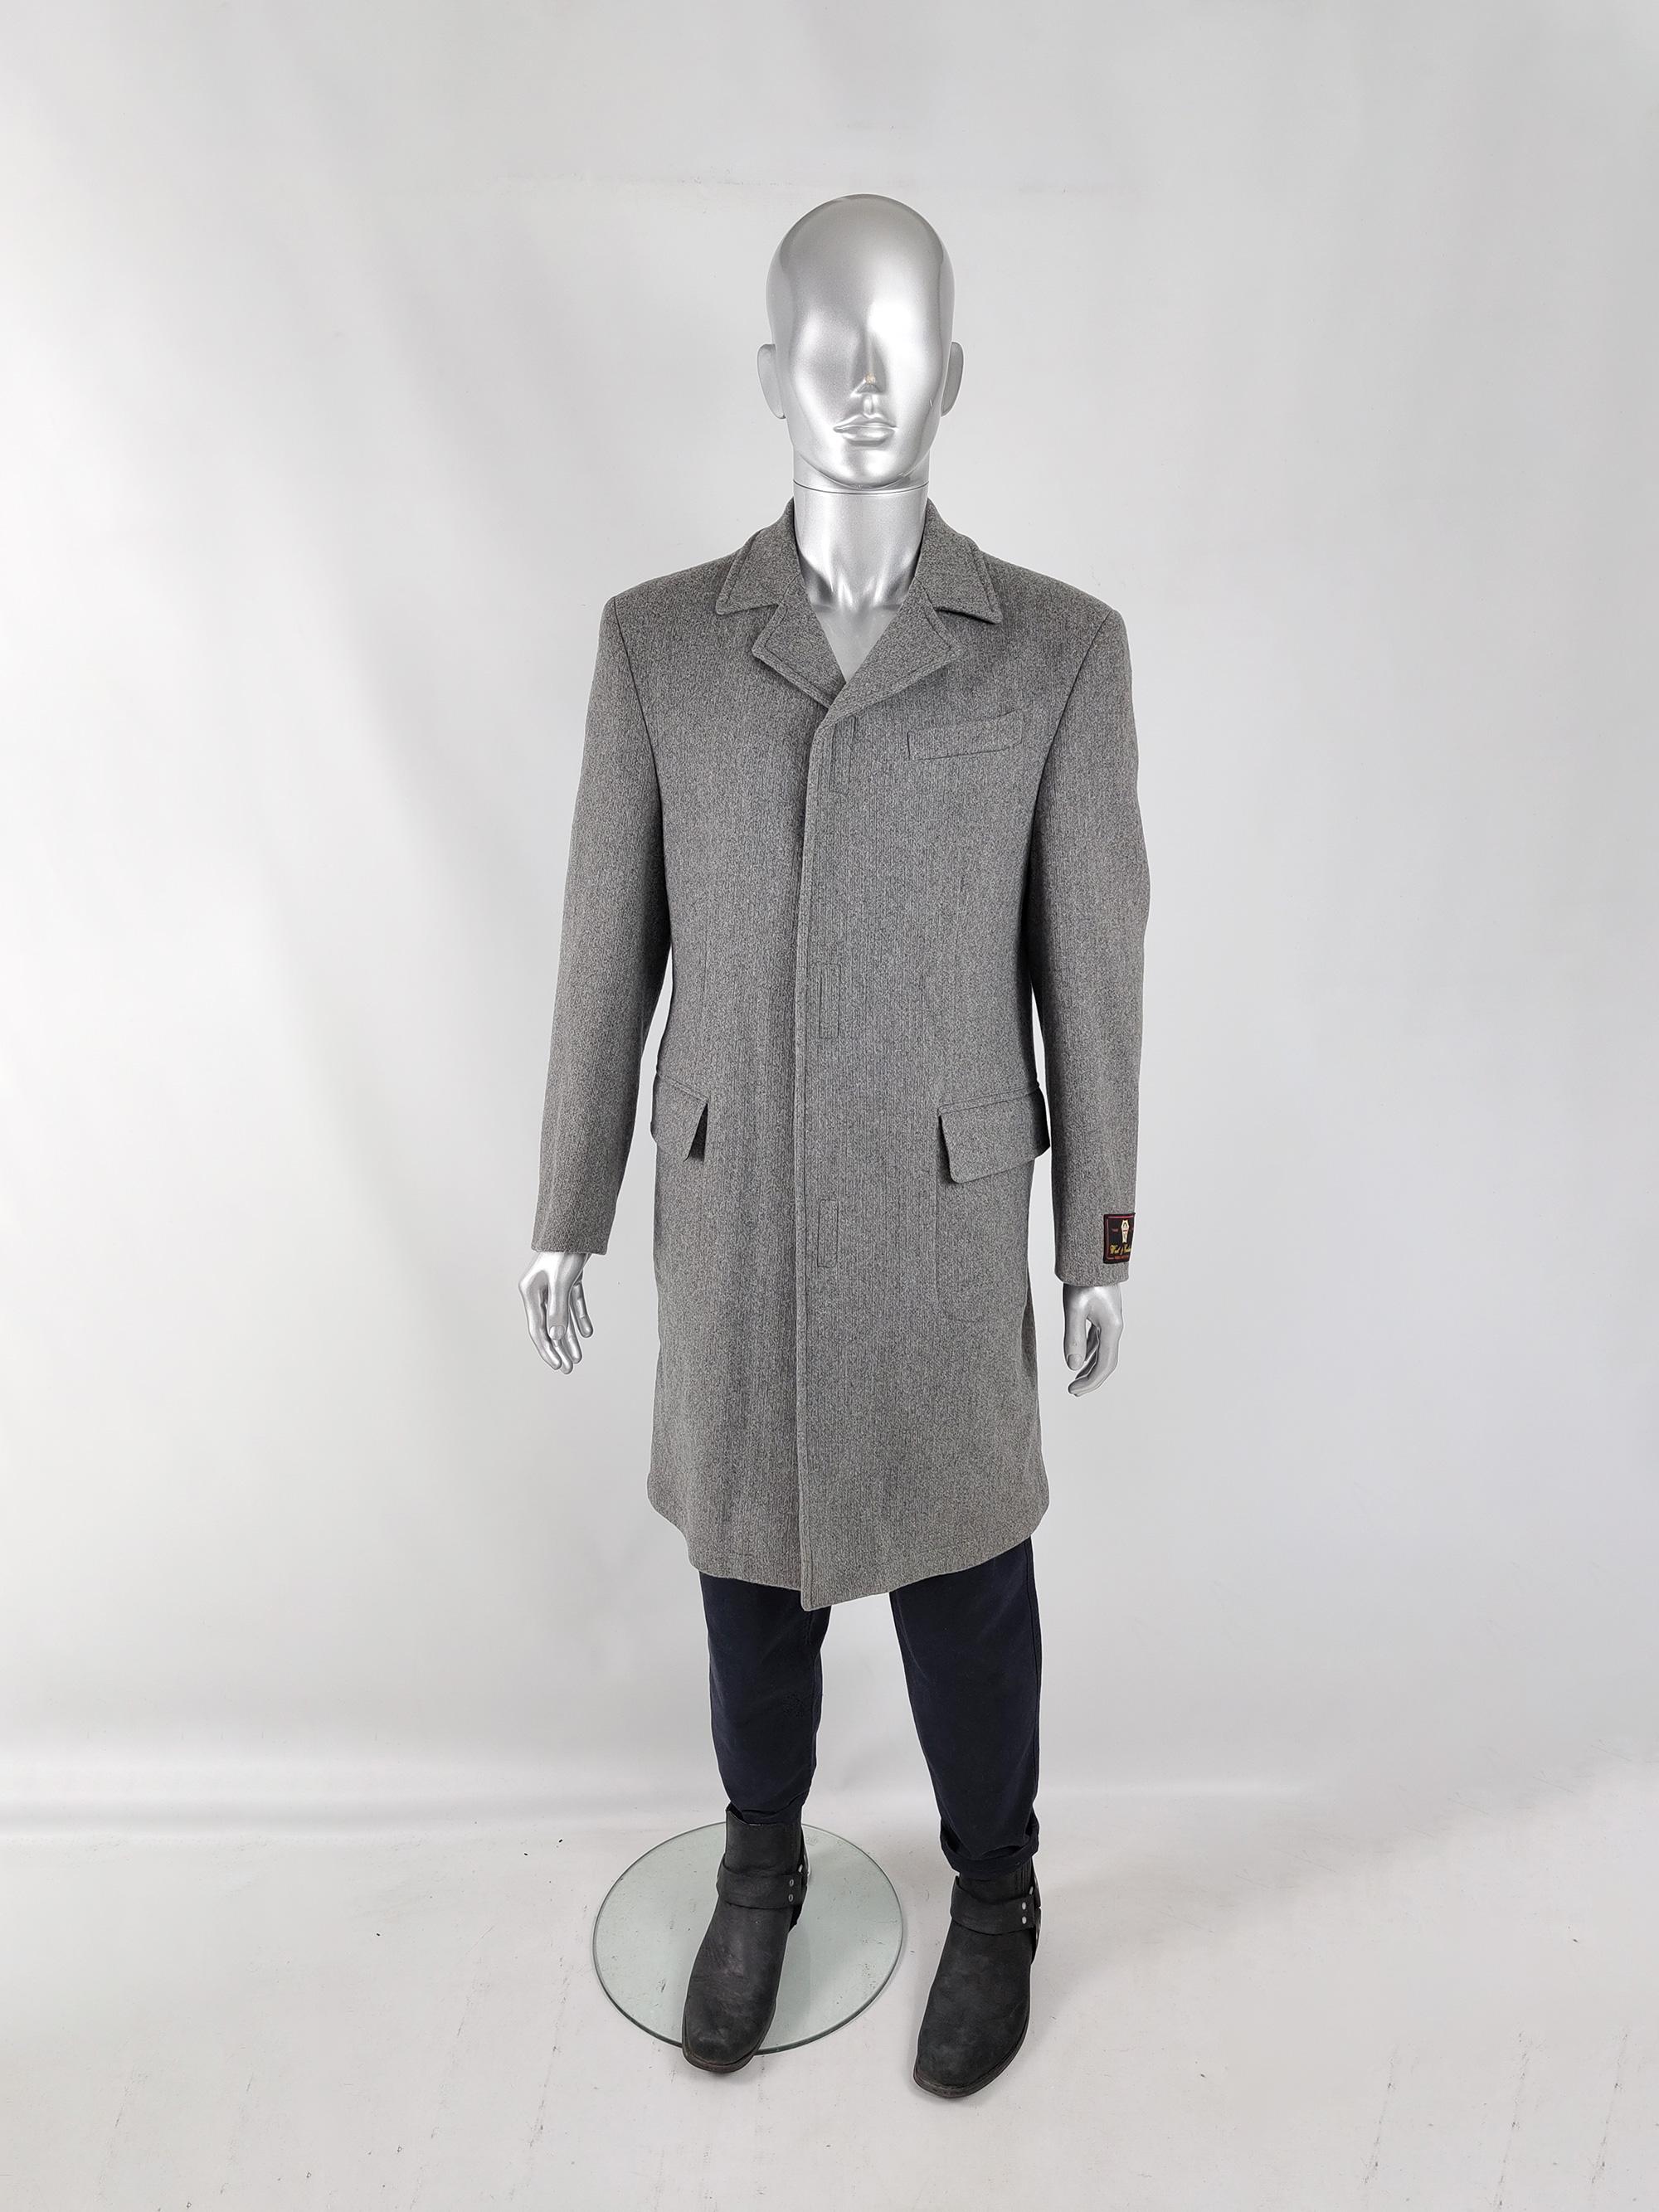 An excellent and stylish vintage mens Italian overcoat from the late 80s / early 90s by Battaglia. Made in Italy, from a grey wool and cashmere mix knit fabric with a long, sleek fit and hook and loop tape (velcro) fastenings at the front to give a